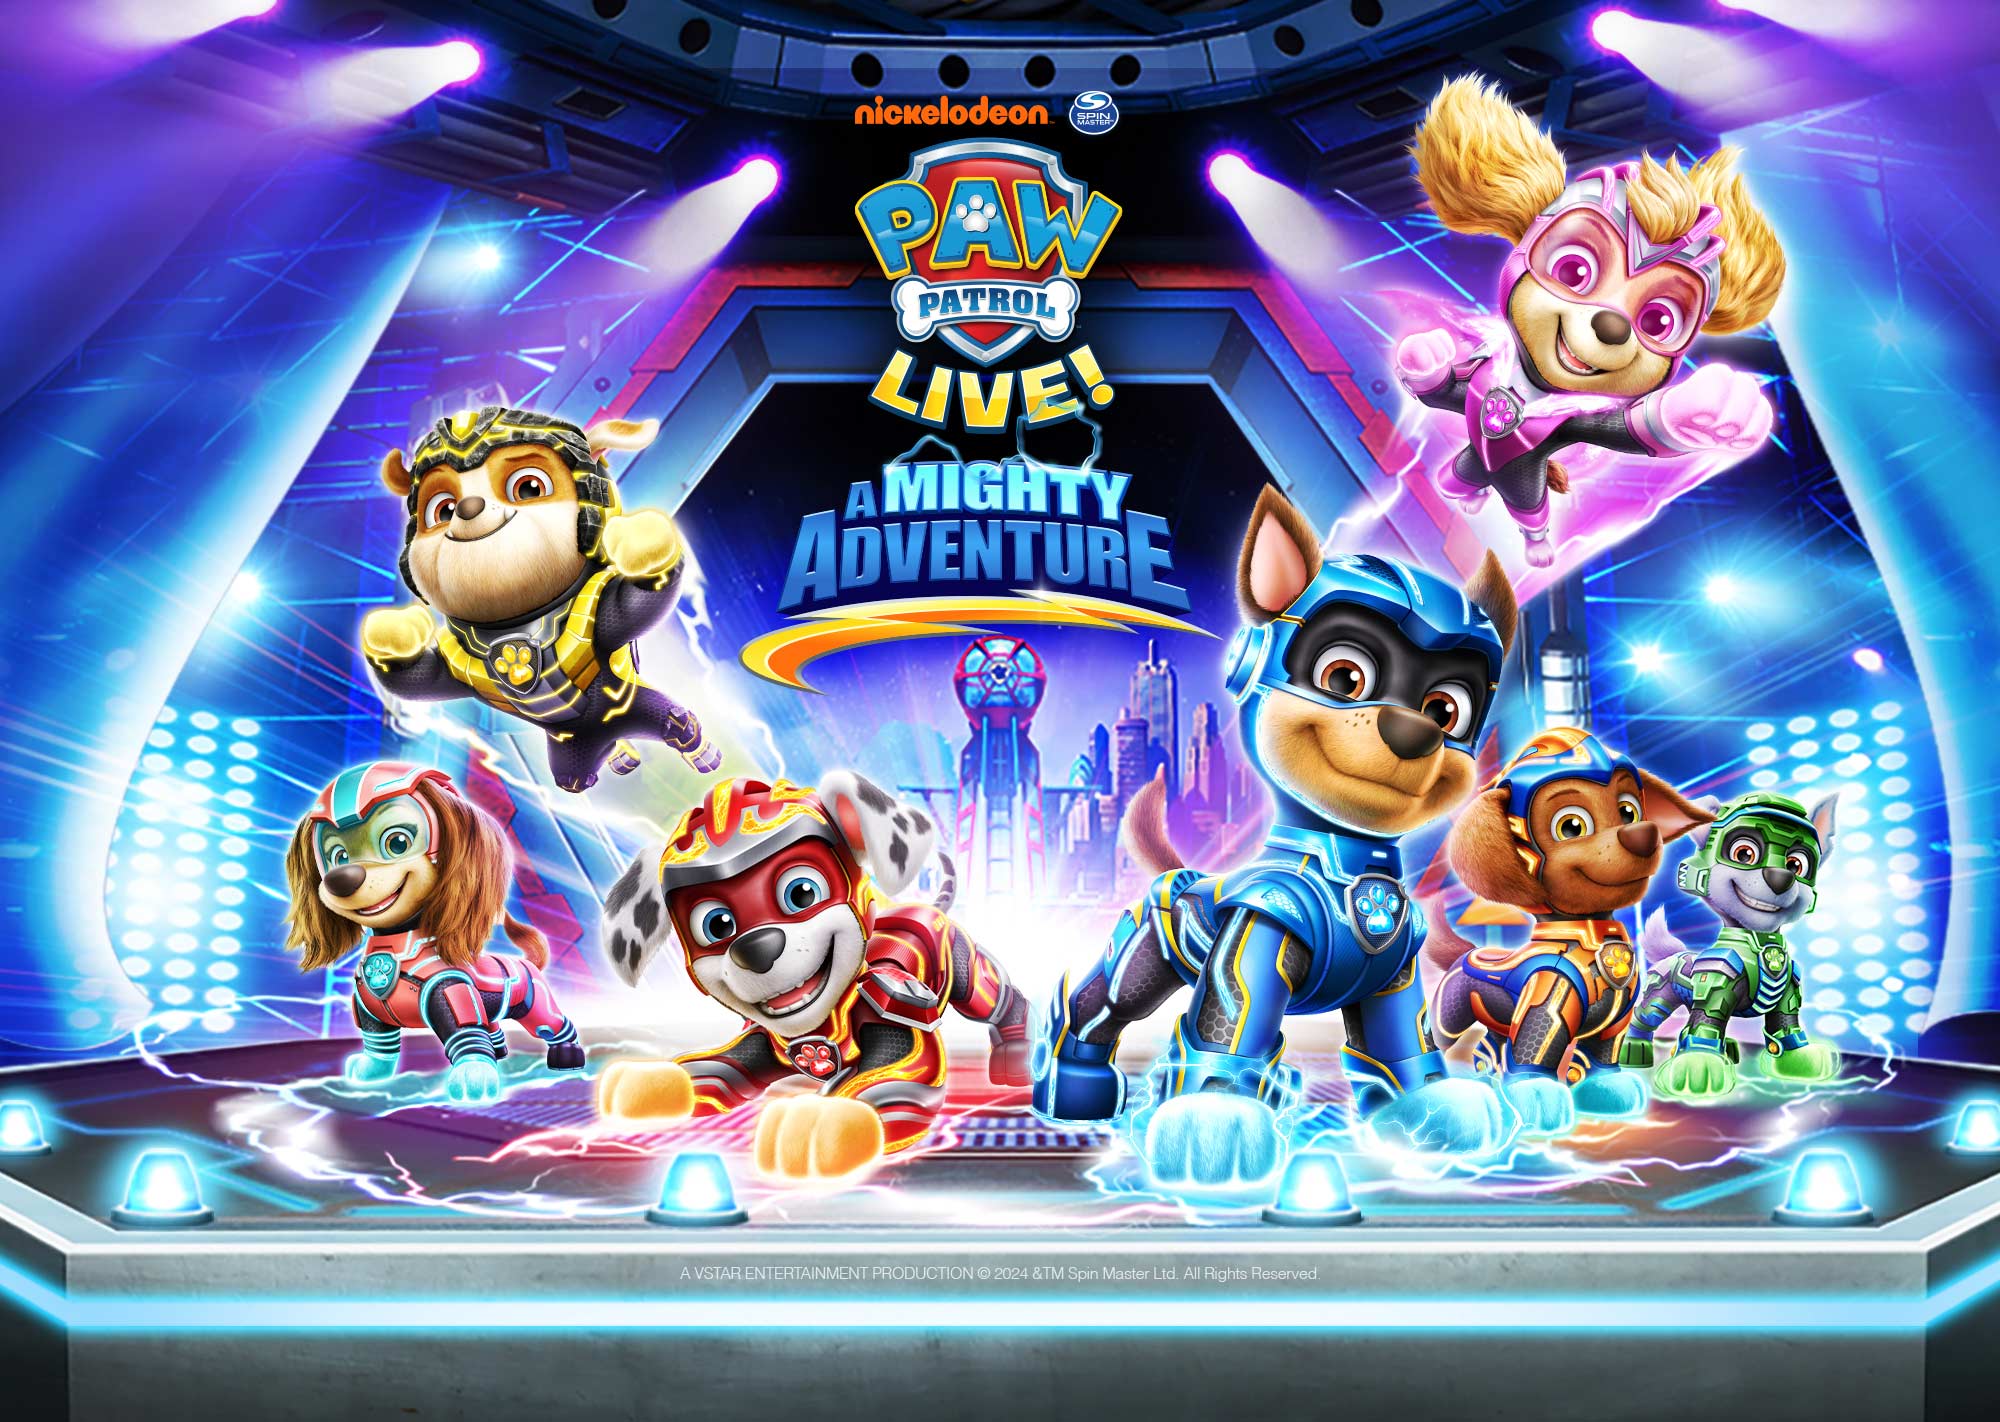 Paw Patrol is back for 4 shows in the Austin Area